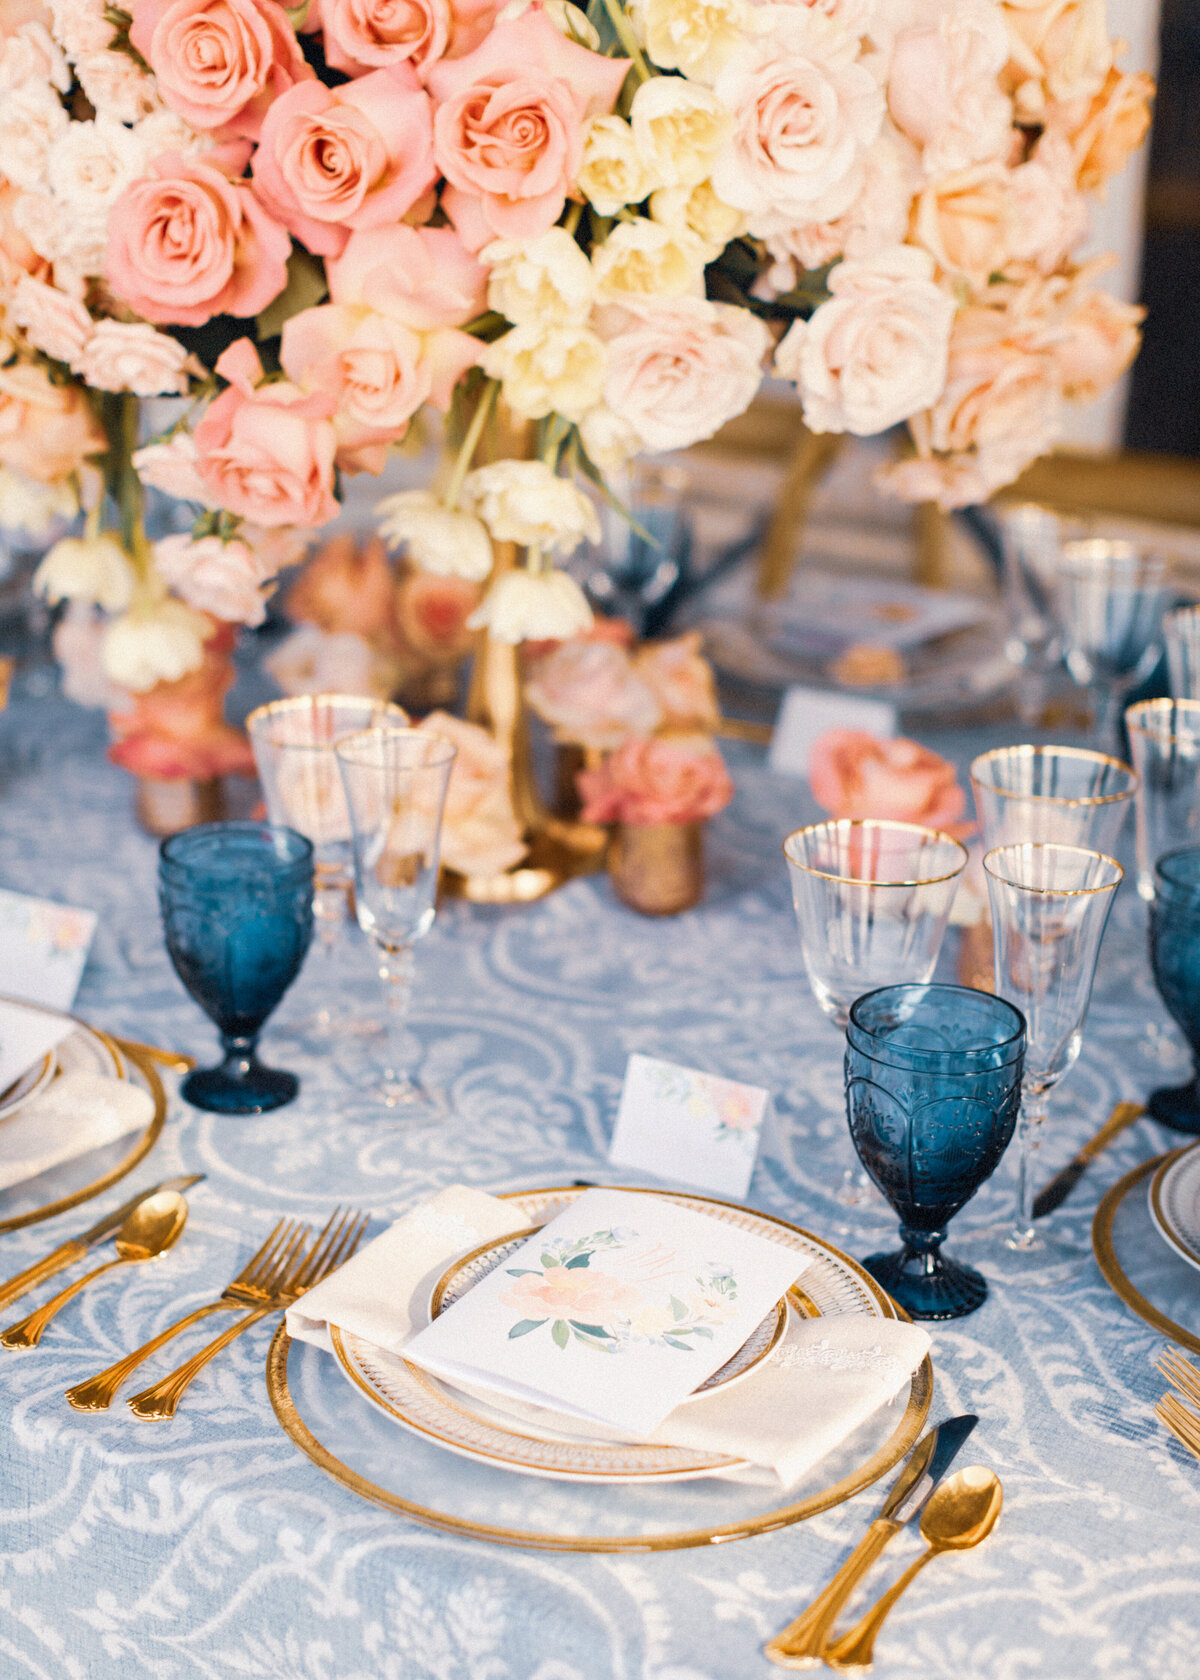 A wedding table is set with vintage lace, blue glassware, gold plates and cutlery and floral menus at a luxury wedding.